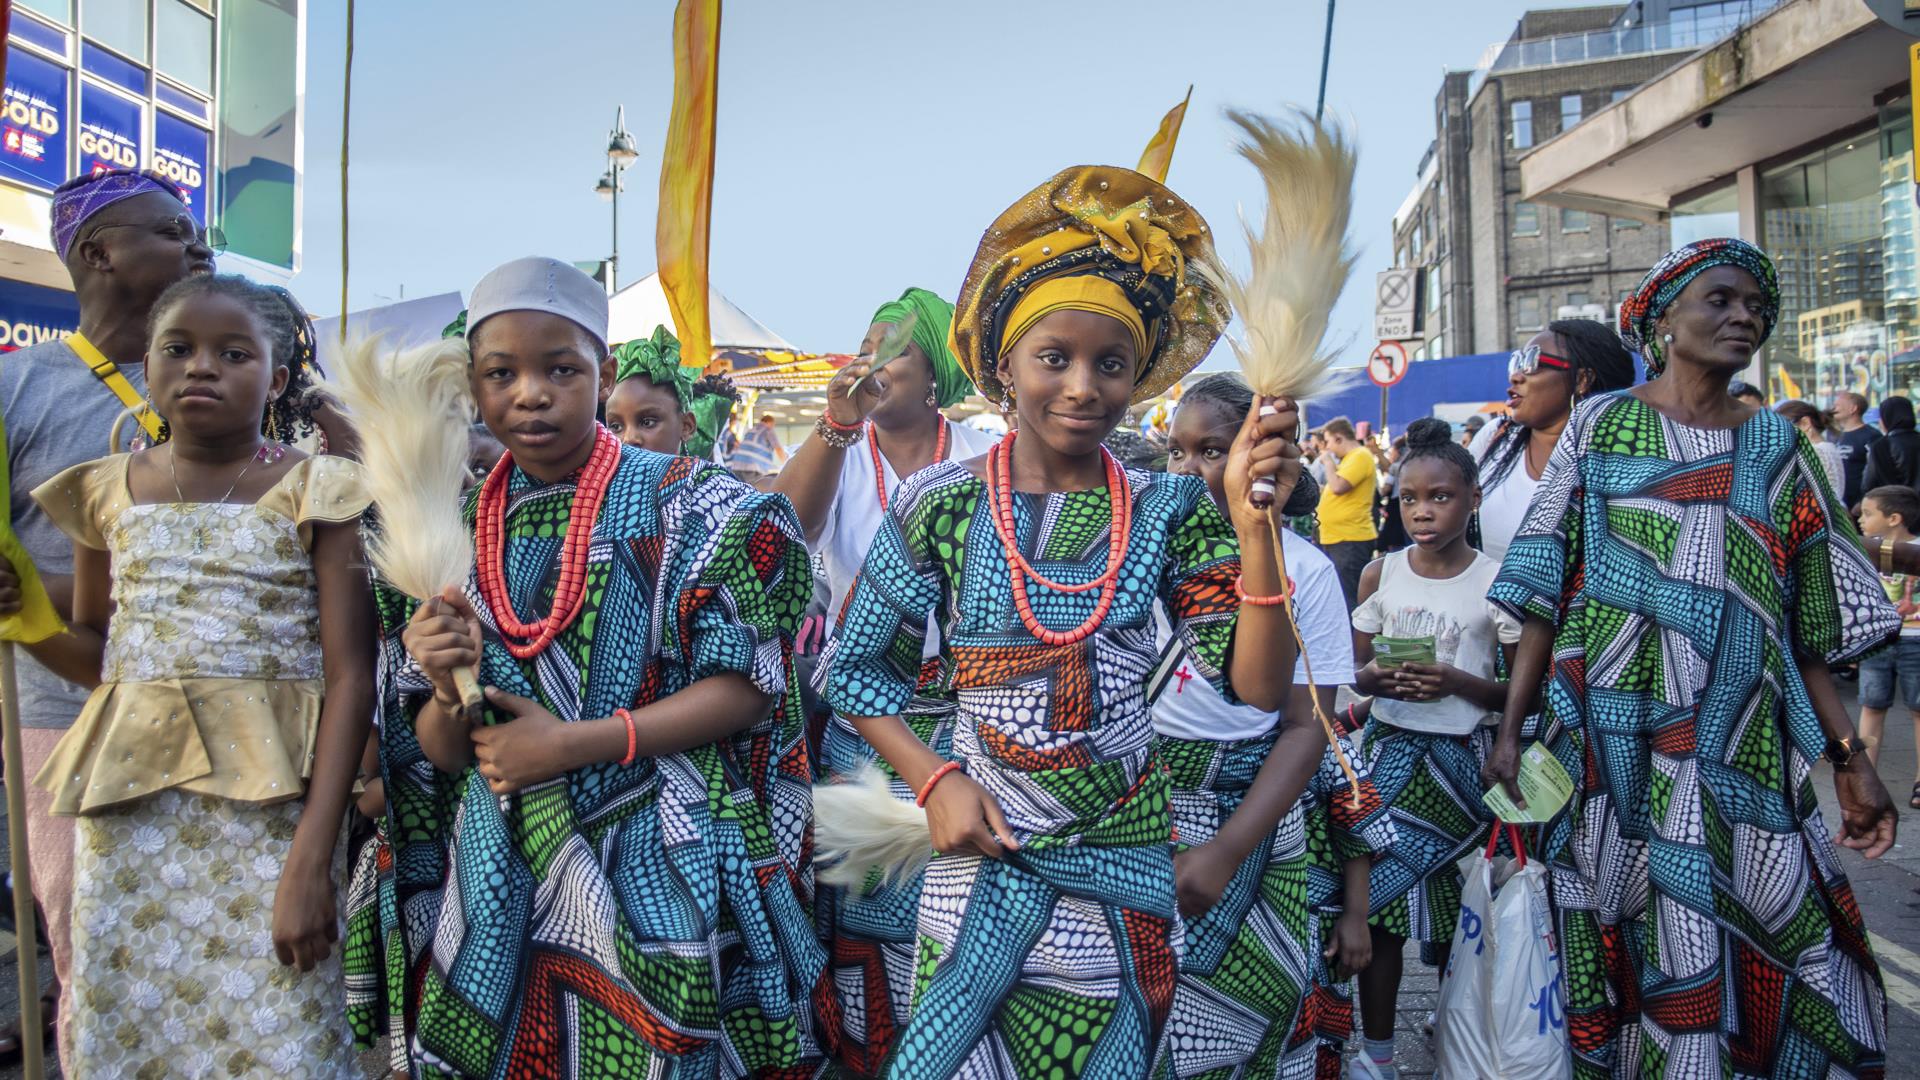 A group of children in traditional African dress at Woolwich Carnival.